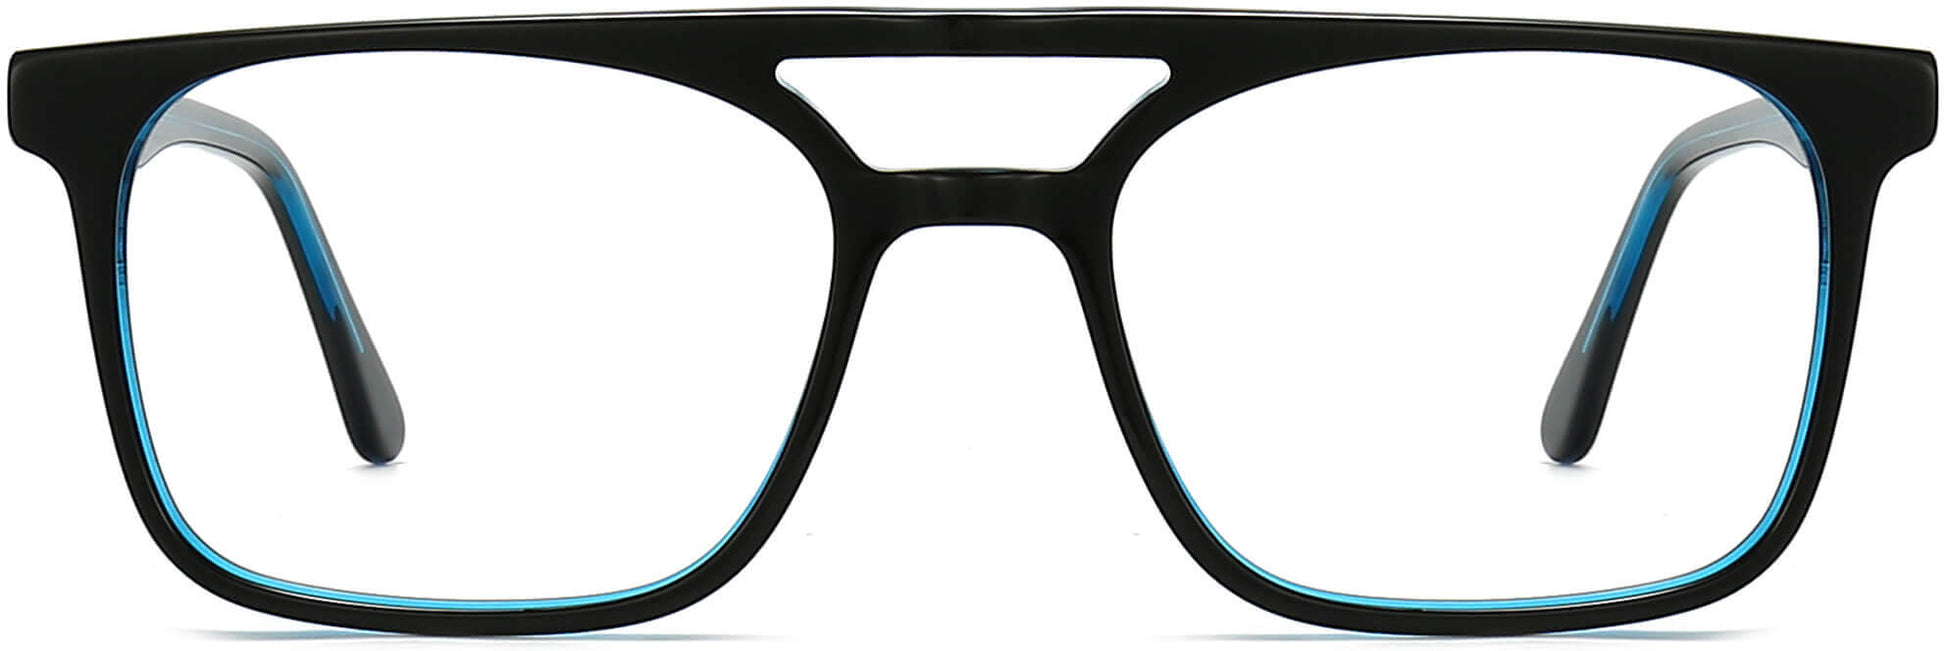 Cora Square Black Eyeglasses from ANRRI, front view